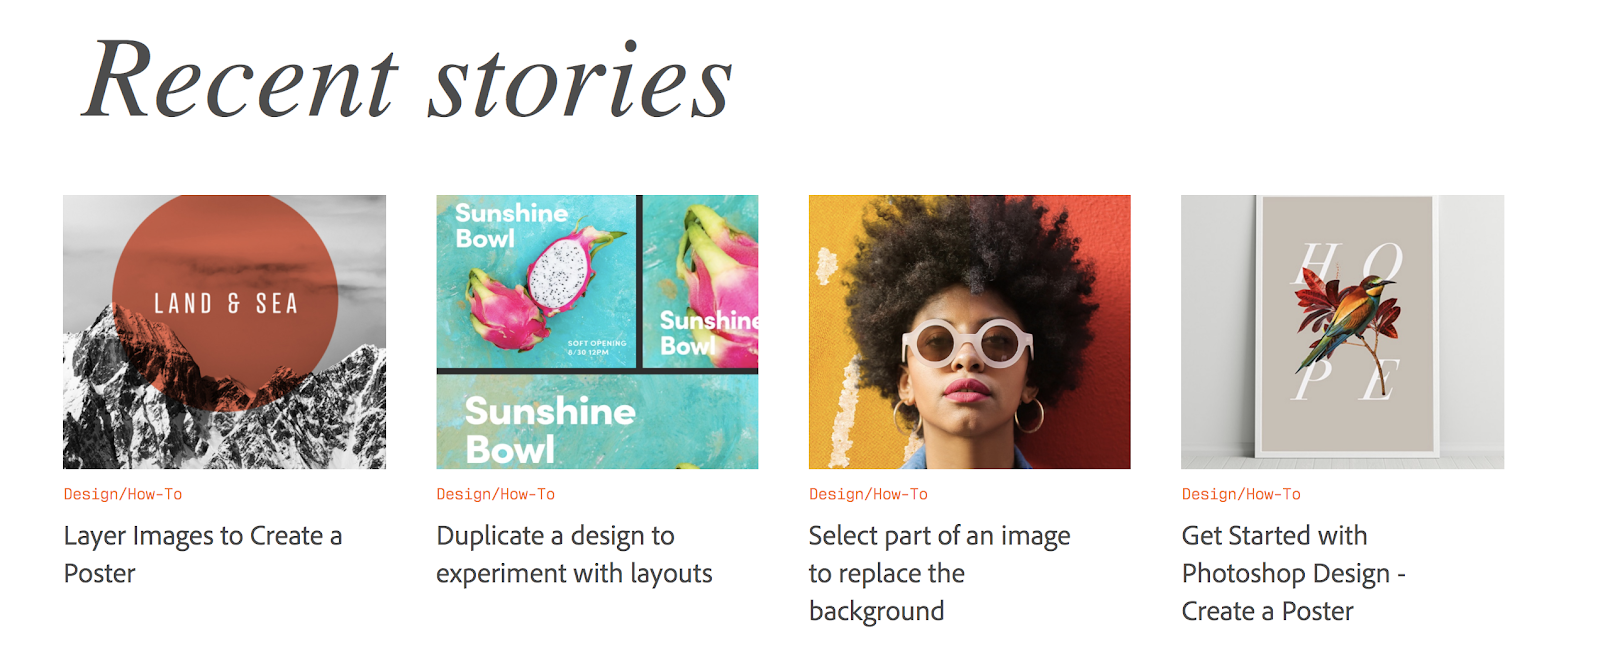 Adobe Create Recent Stories (and Featured Images) Screenshot